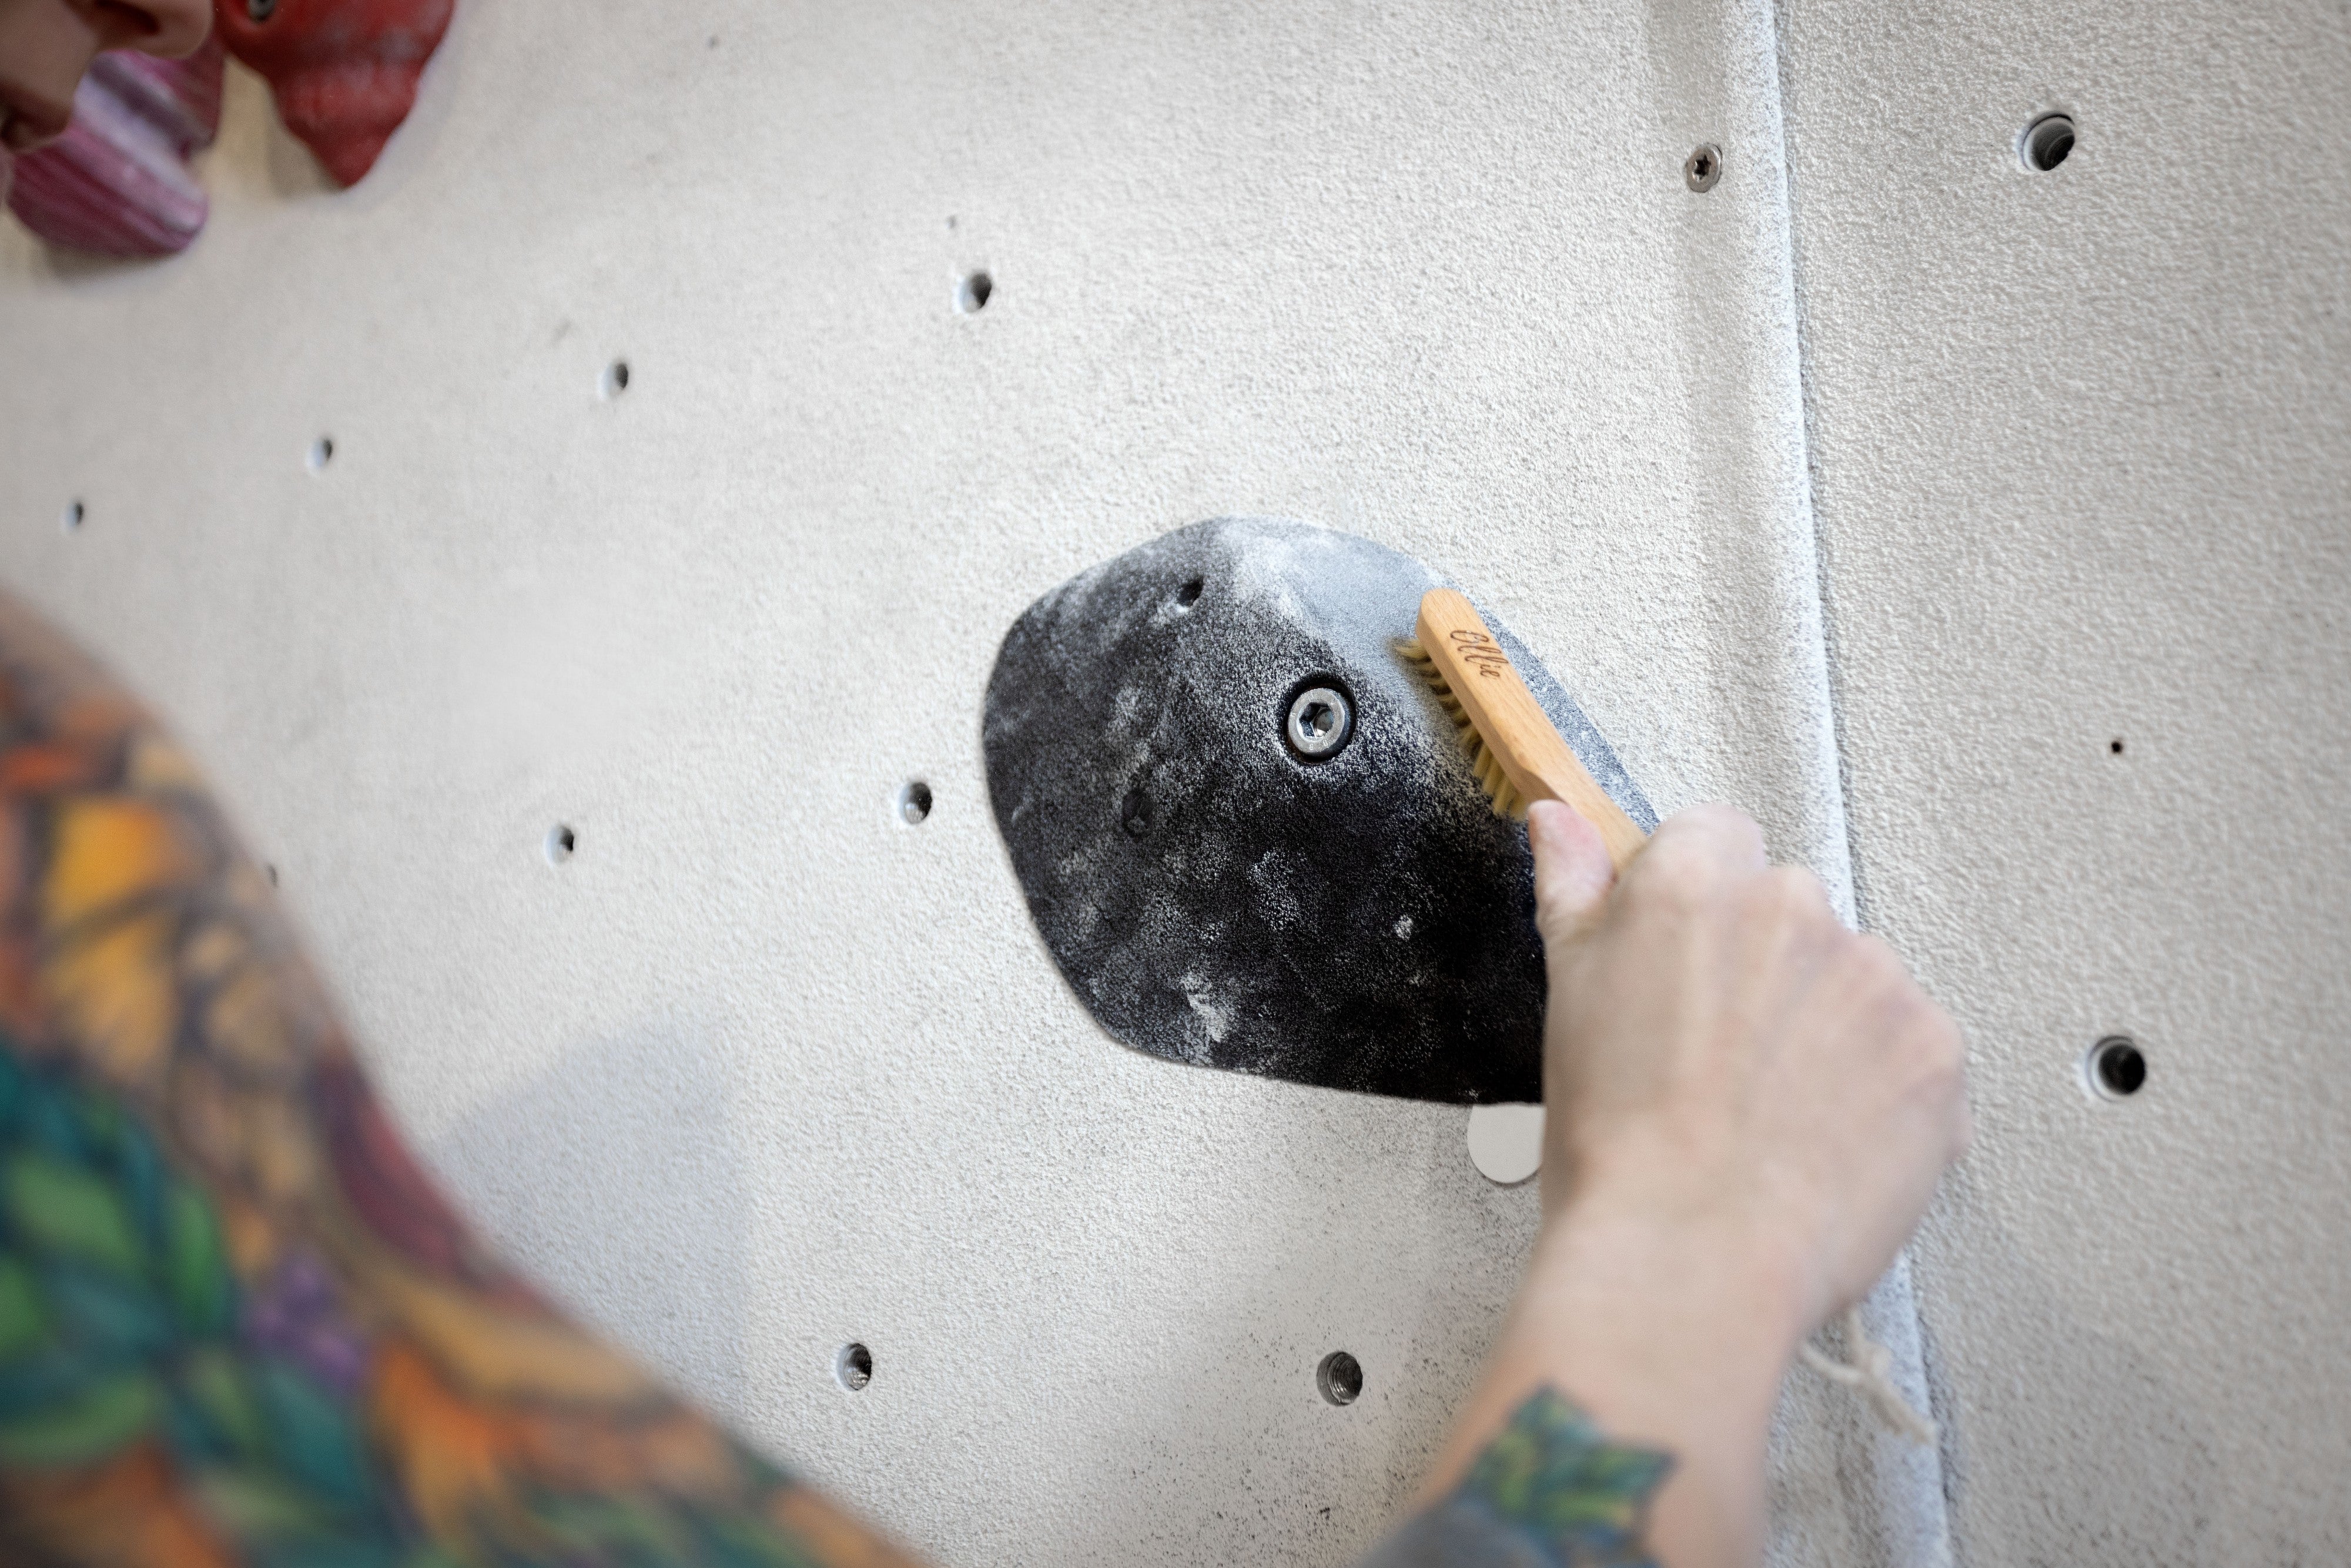 Cleaning a climbing hold with a bouldering brush